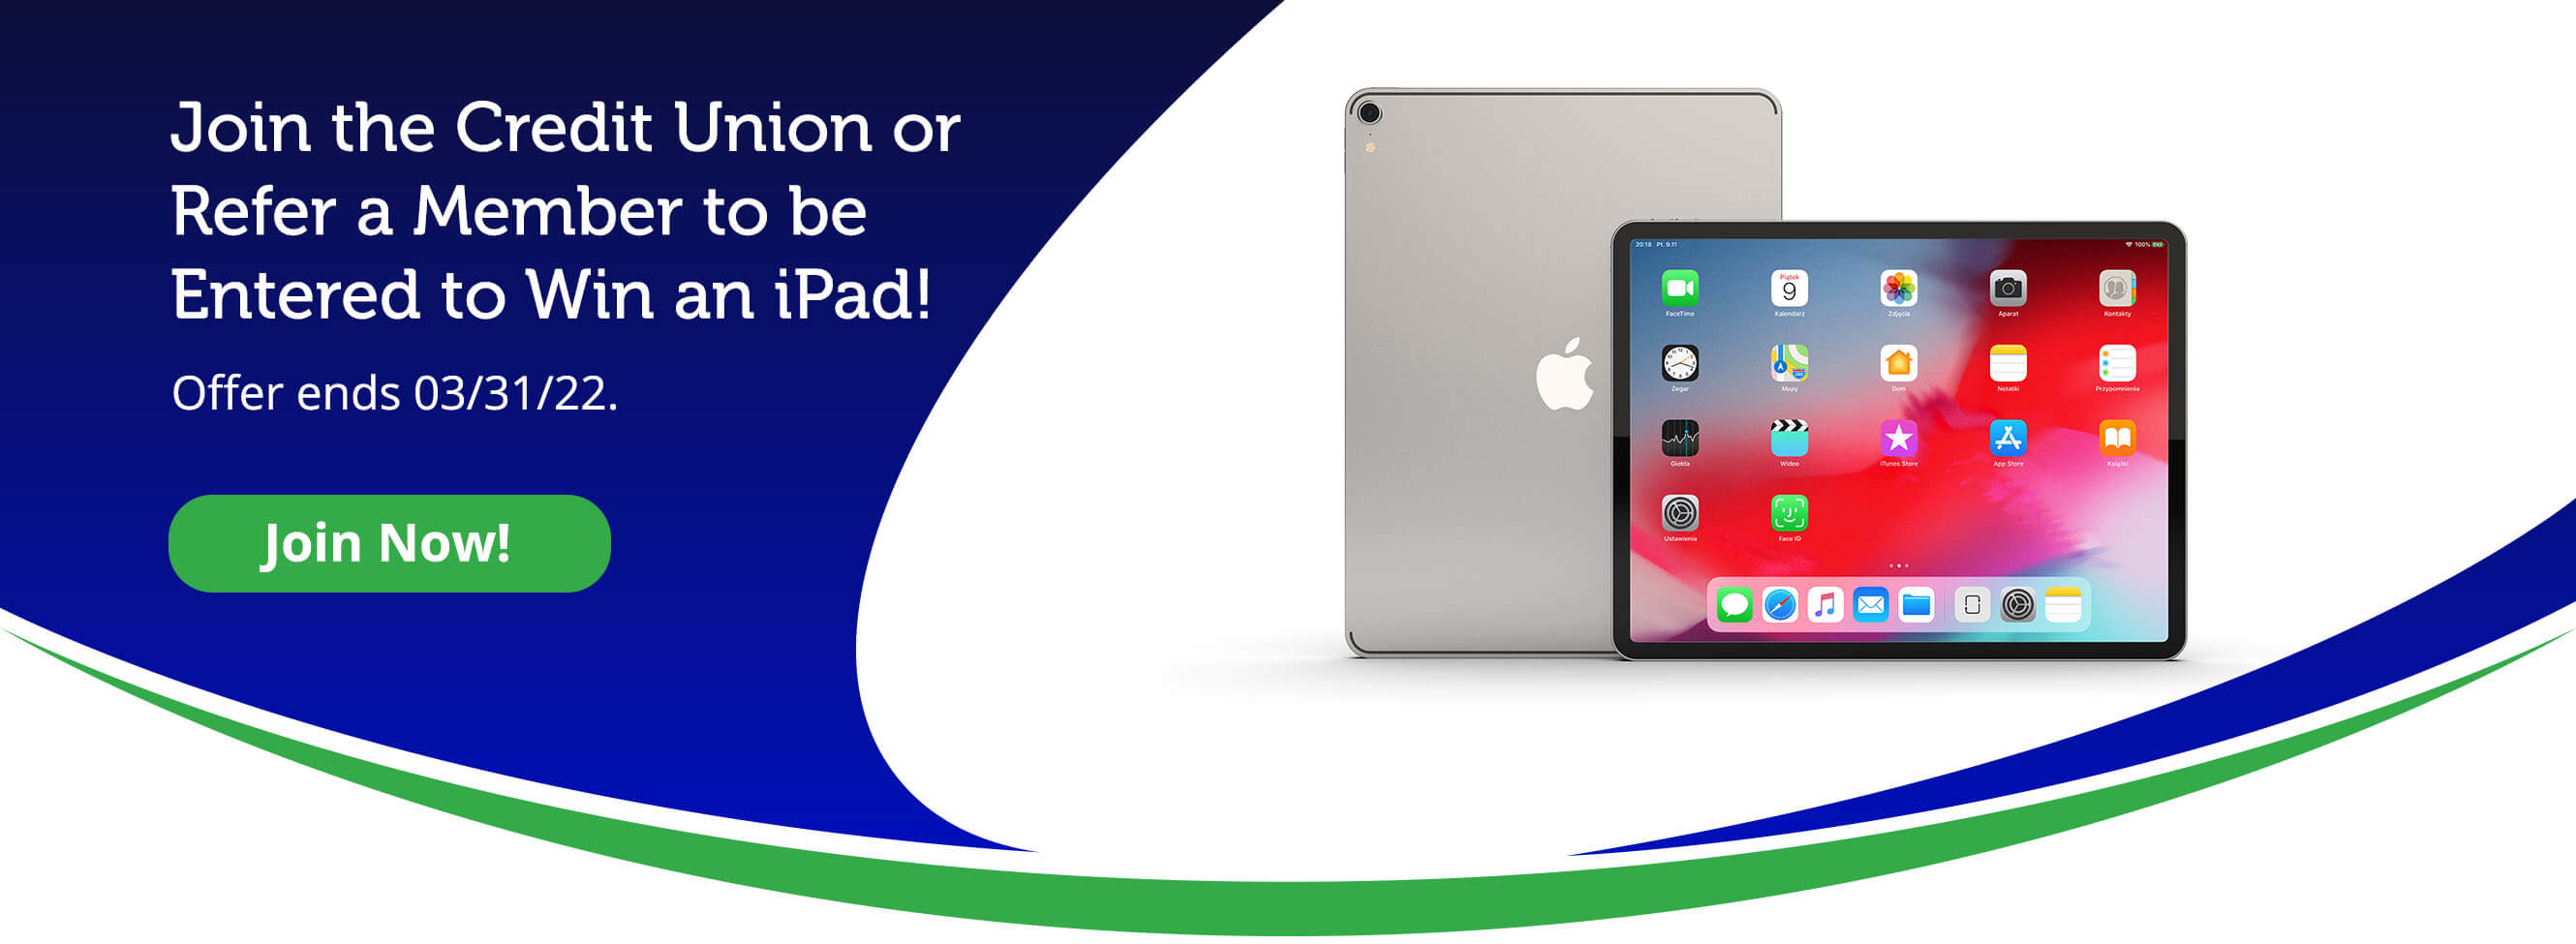 Join or Refer, and Win an iPad!